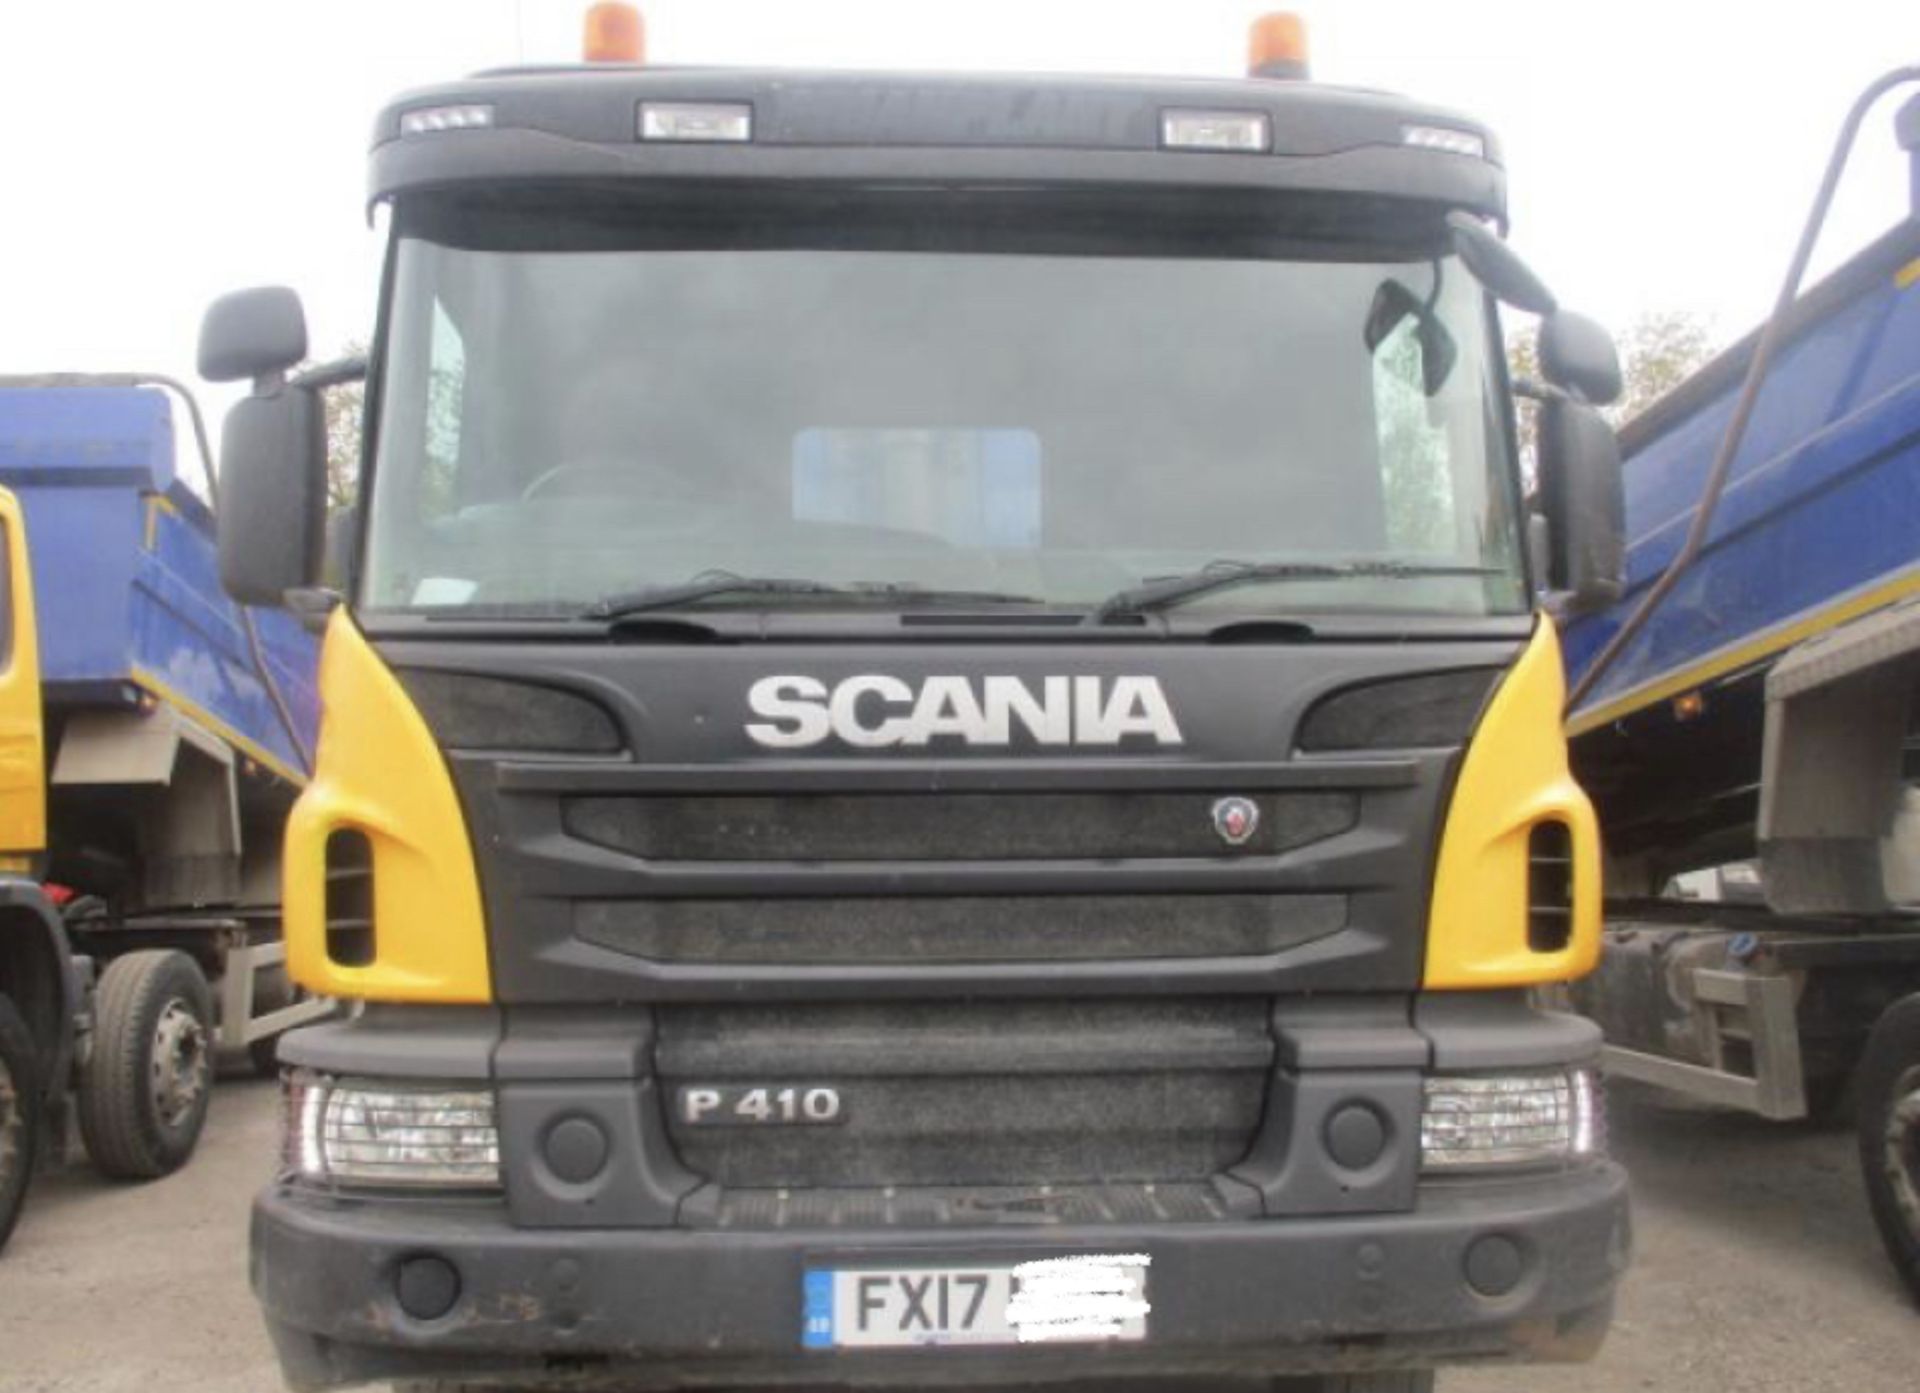 Scania tipper - Image 7 of 10